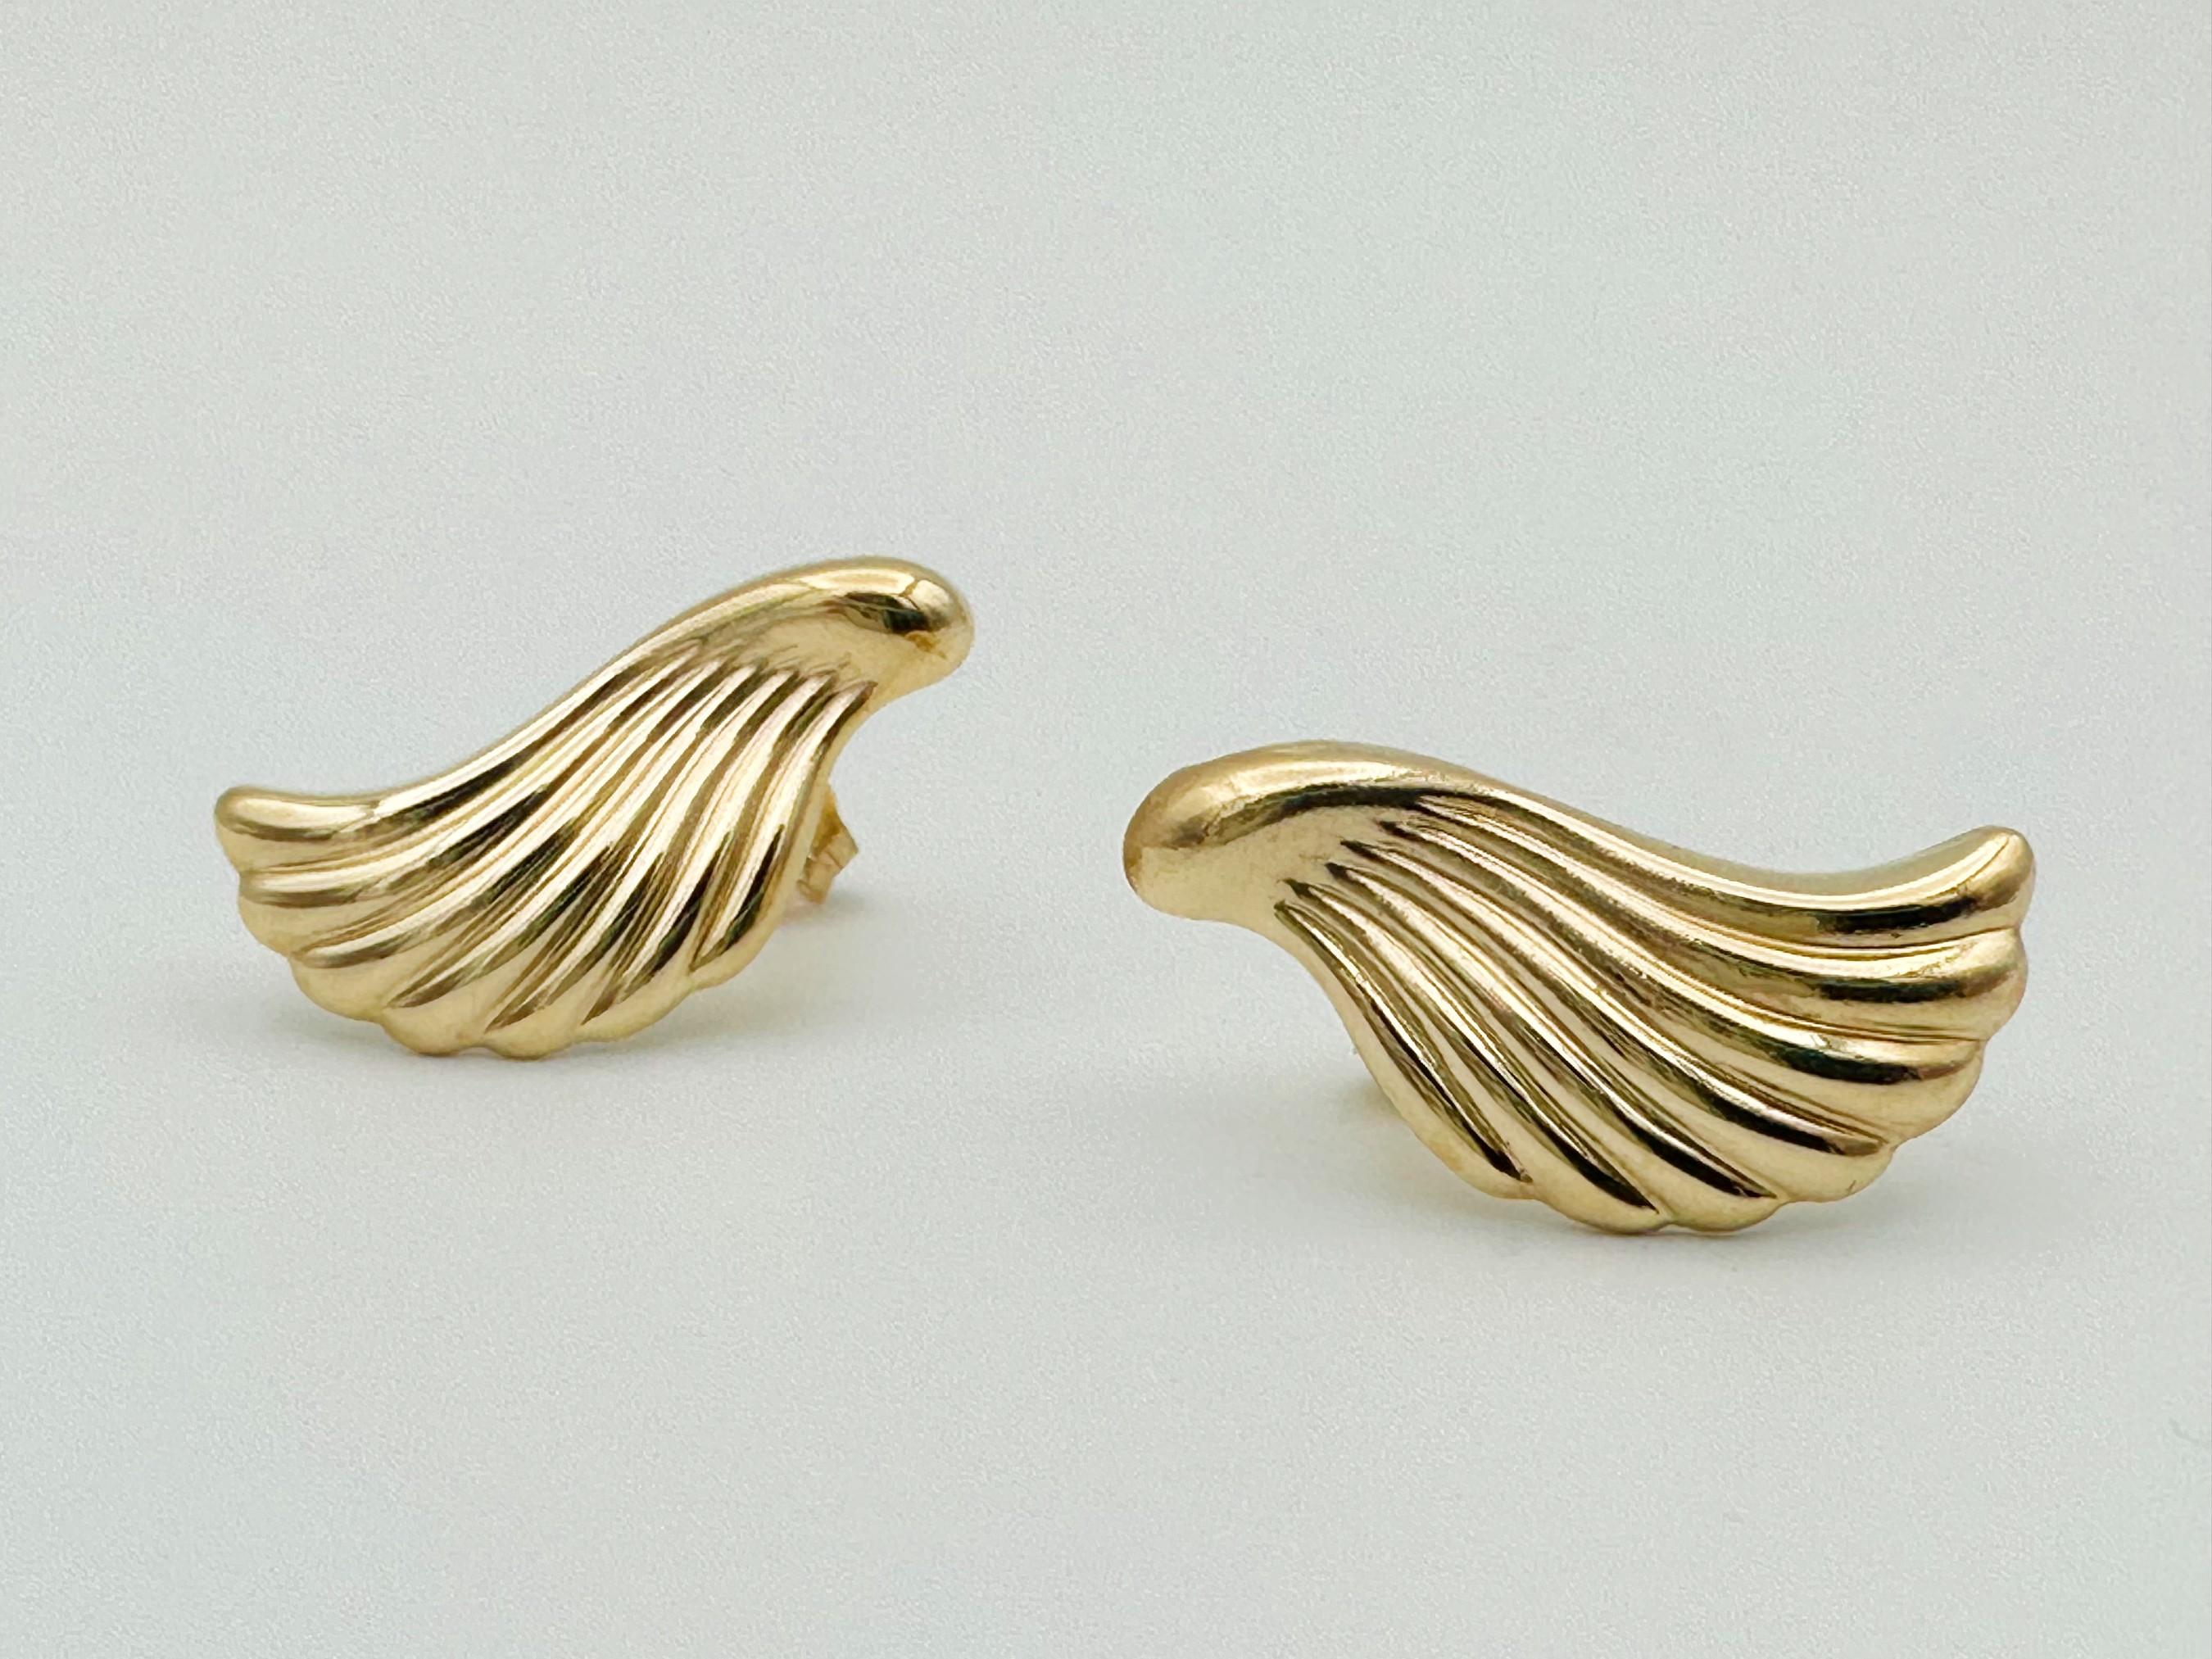 Adorn yourself with a hint of heavenly luxury with these vintage 14K yellow gold angel wing earrings. Crafted from 14K yellow gold, these earrings will bring a touch of glamour to your everyday looks. 

Earrings measure 0.87